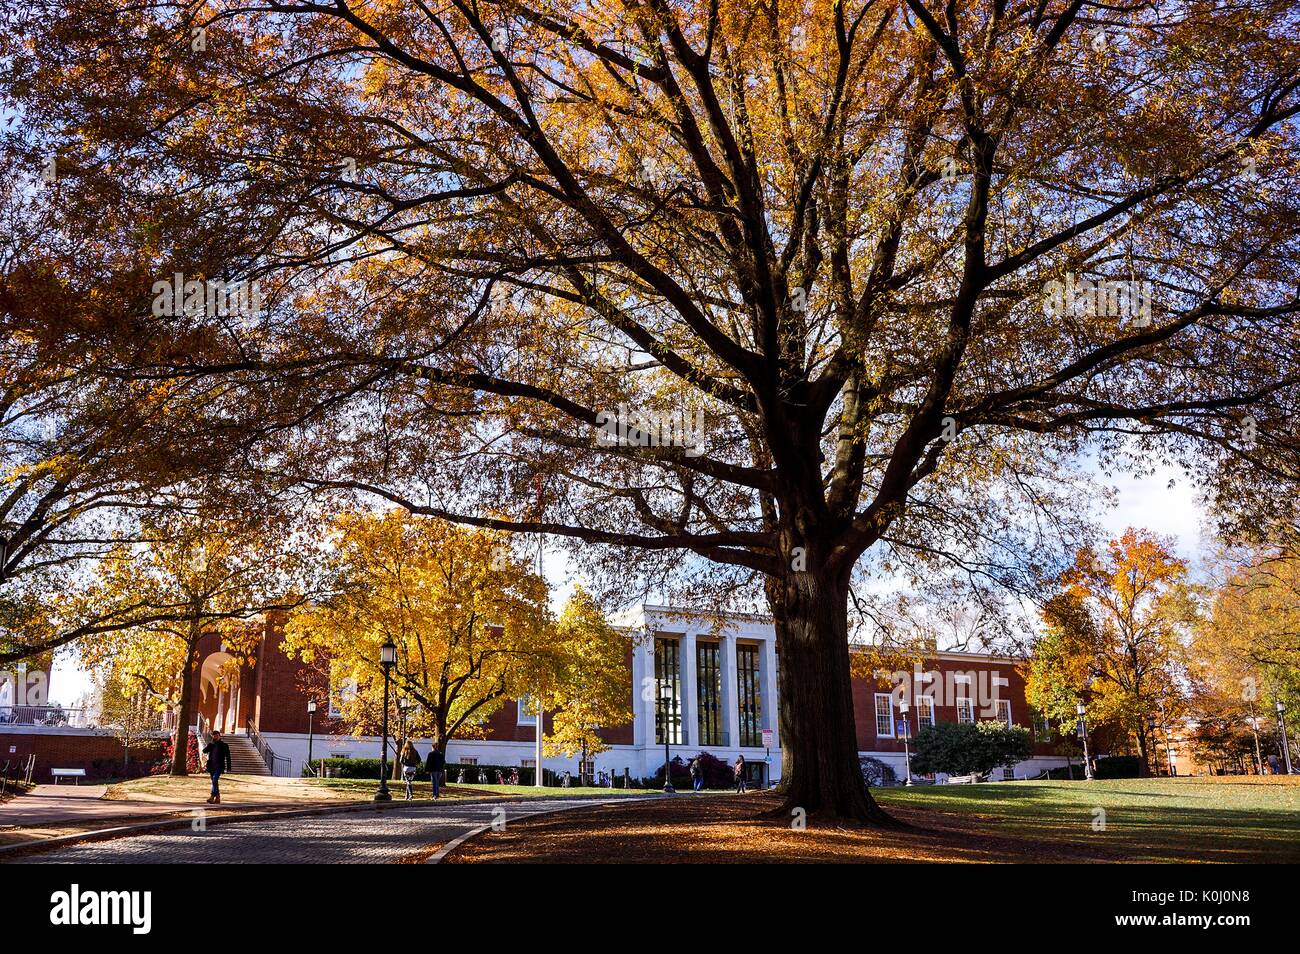 Trees covered in orange and yellow autumnal leaves frame the Milton S. Eisenhower Library on the Homewood campus of the Johns Hopkins University in Baltimore, Maryland, 2015. Courtesy Eric Chen. Stock Photo